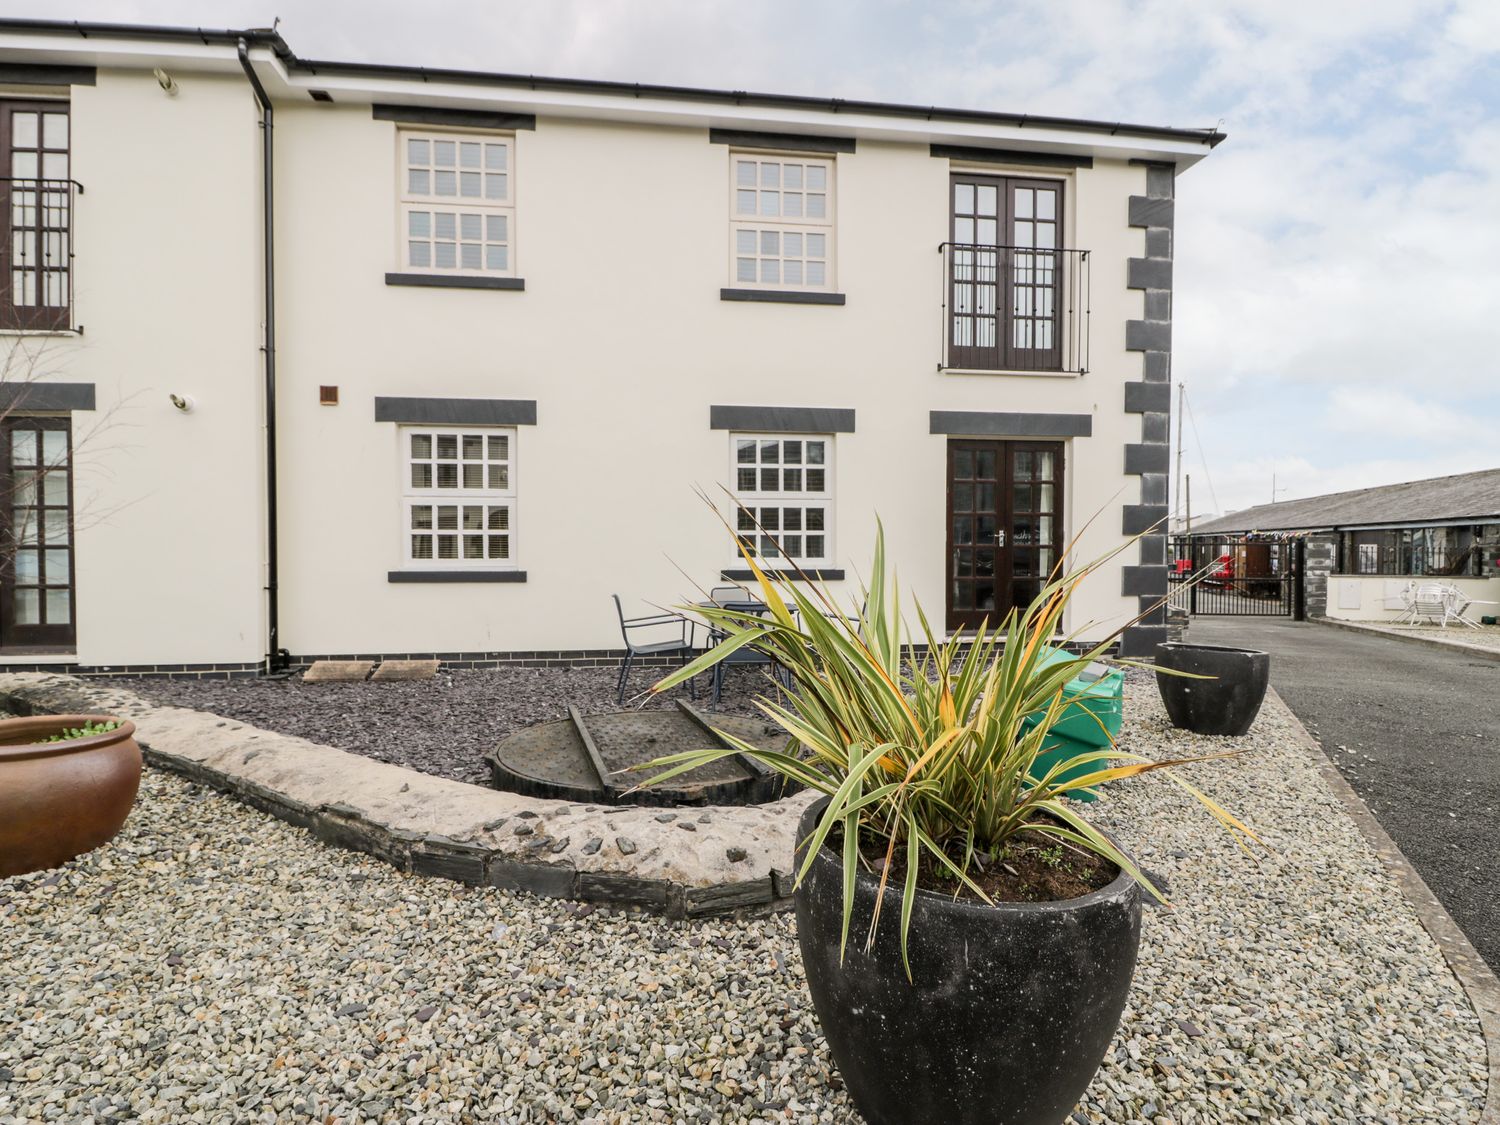 Whistle Stop Apartment - North Wales - 1116654 - photo 1